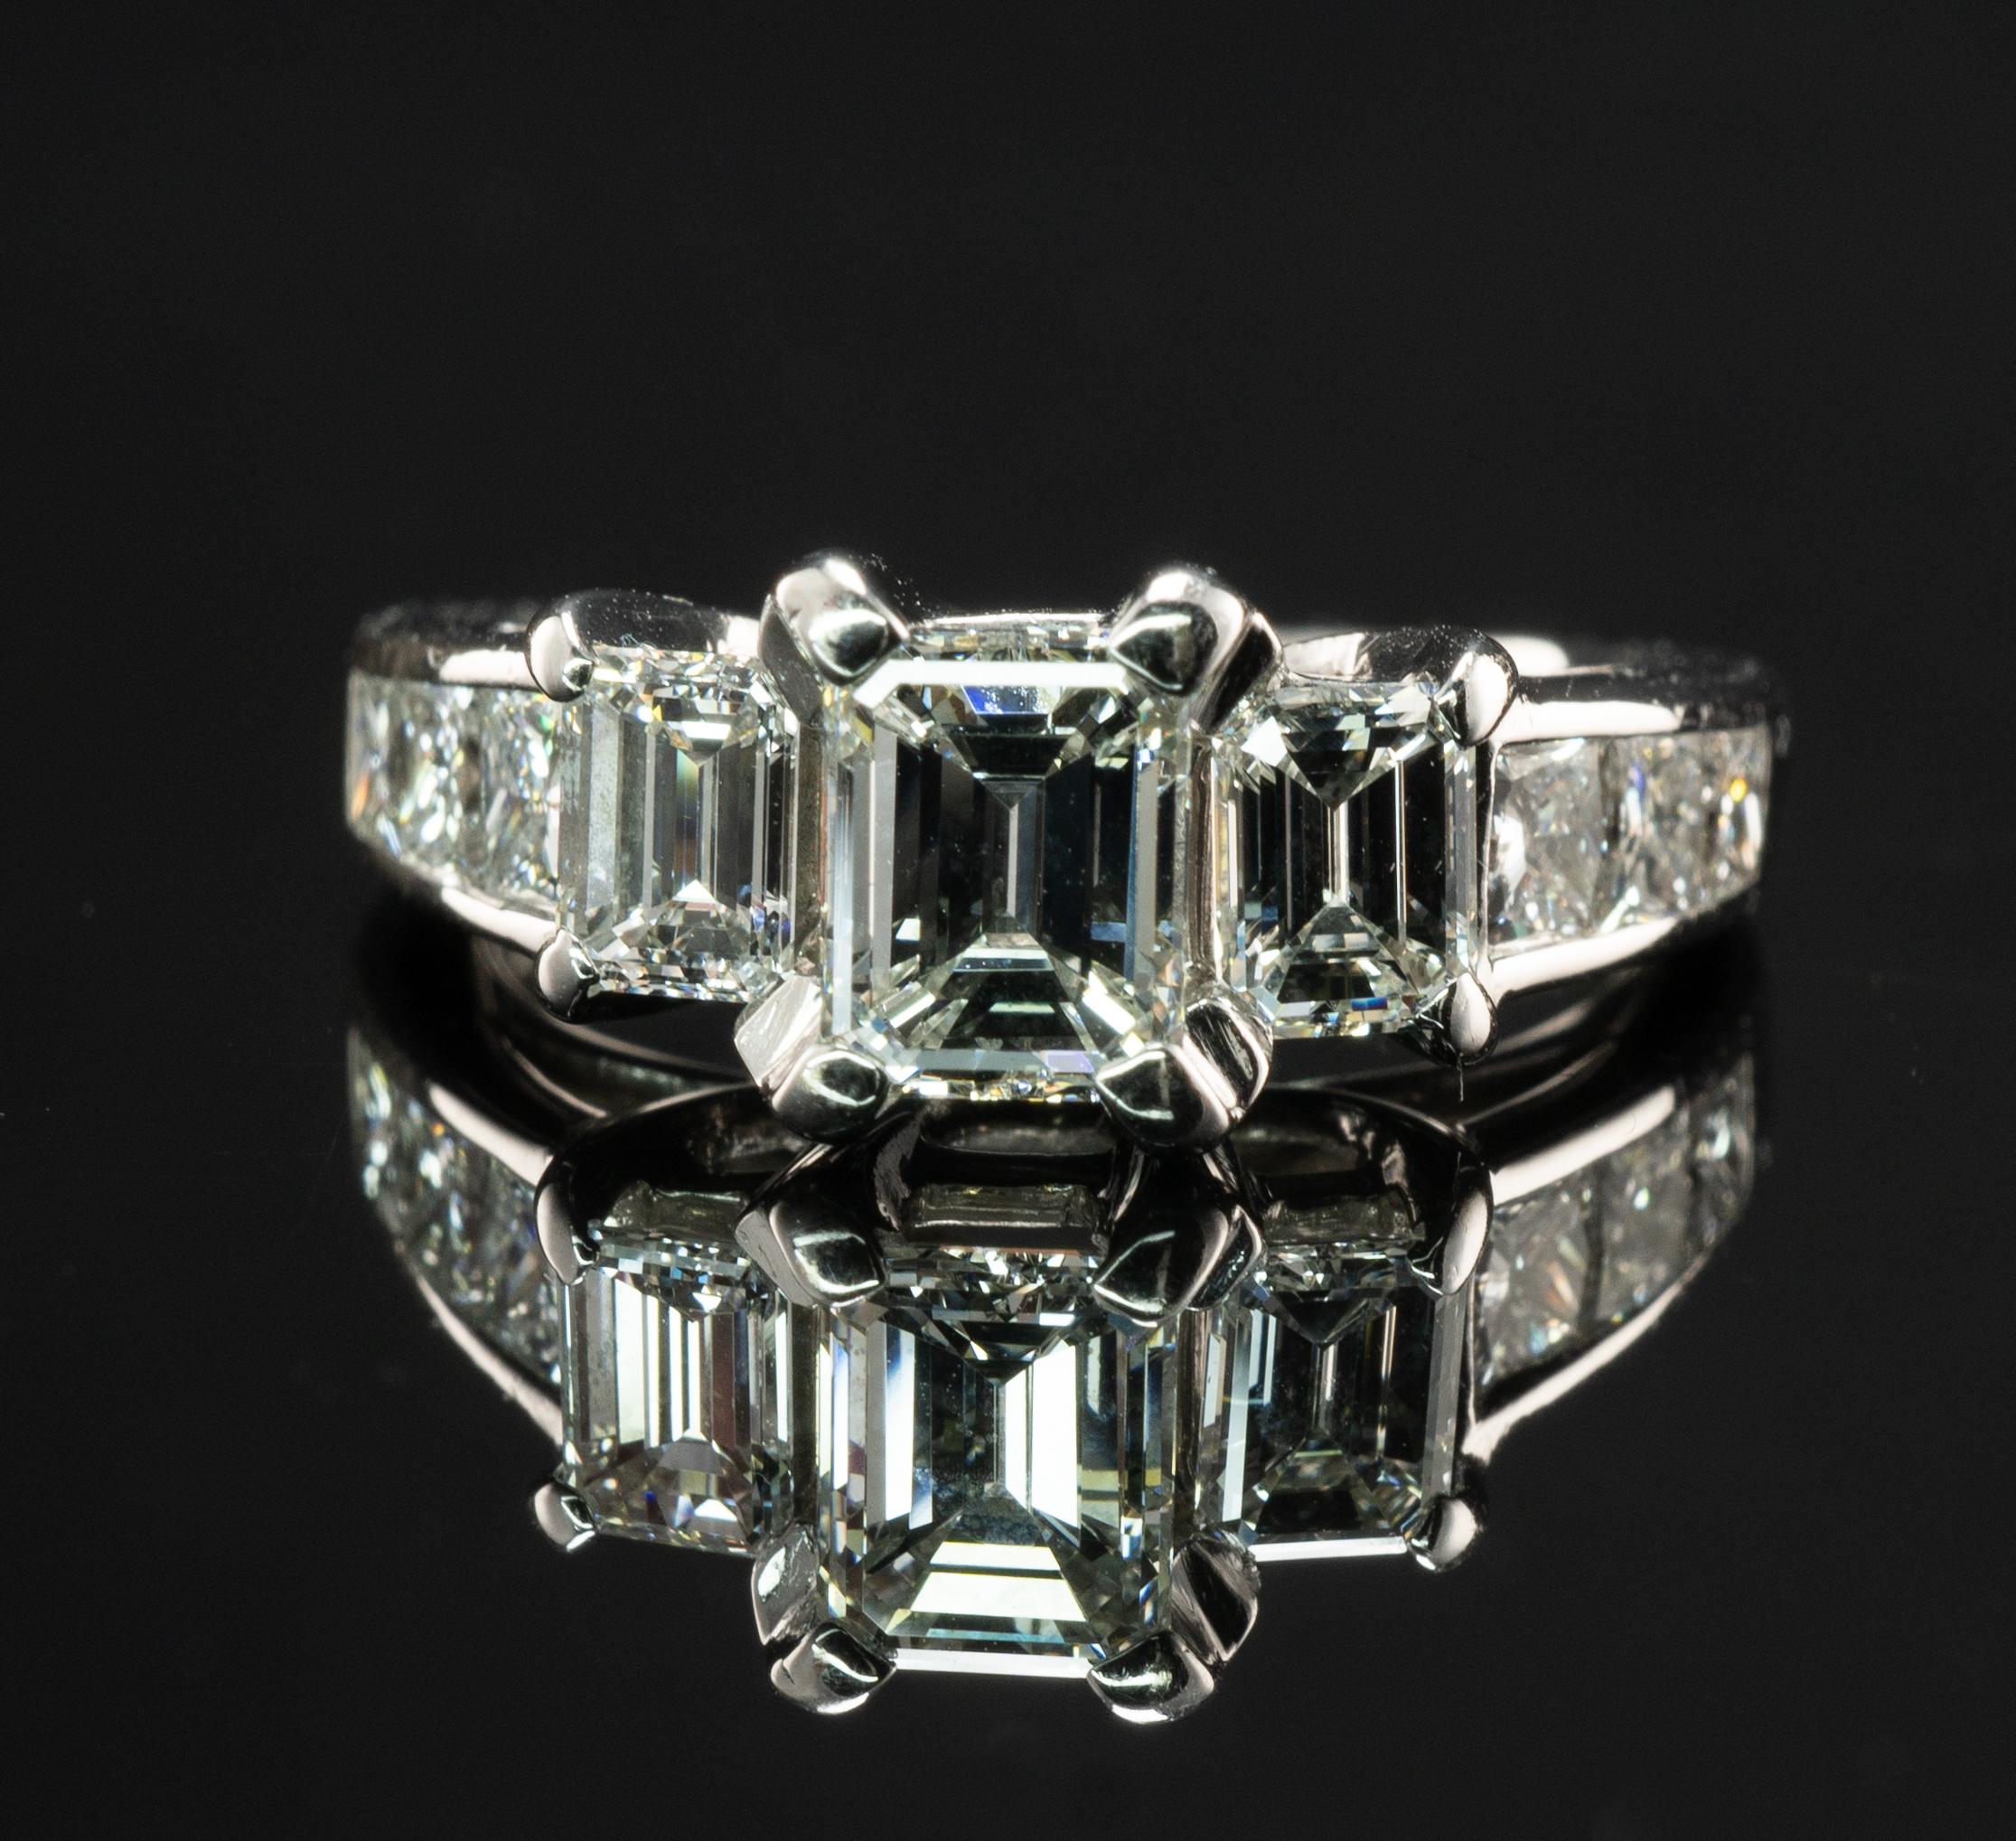 Diamond Ring 18K White Gold Band  2.00 cts TDW Three Emerald cut

This solid 18K White gold estate ring would make a marvelous engagement ring or wedding ring.
The center emerald cut genuine diamond is .70 Carat (6x4.75mm).
Two diamond baguettes